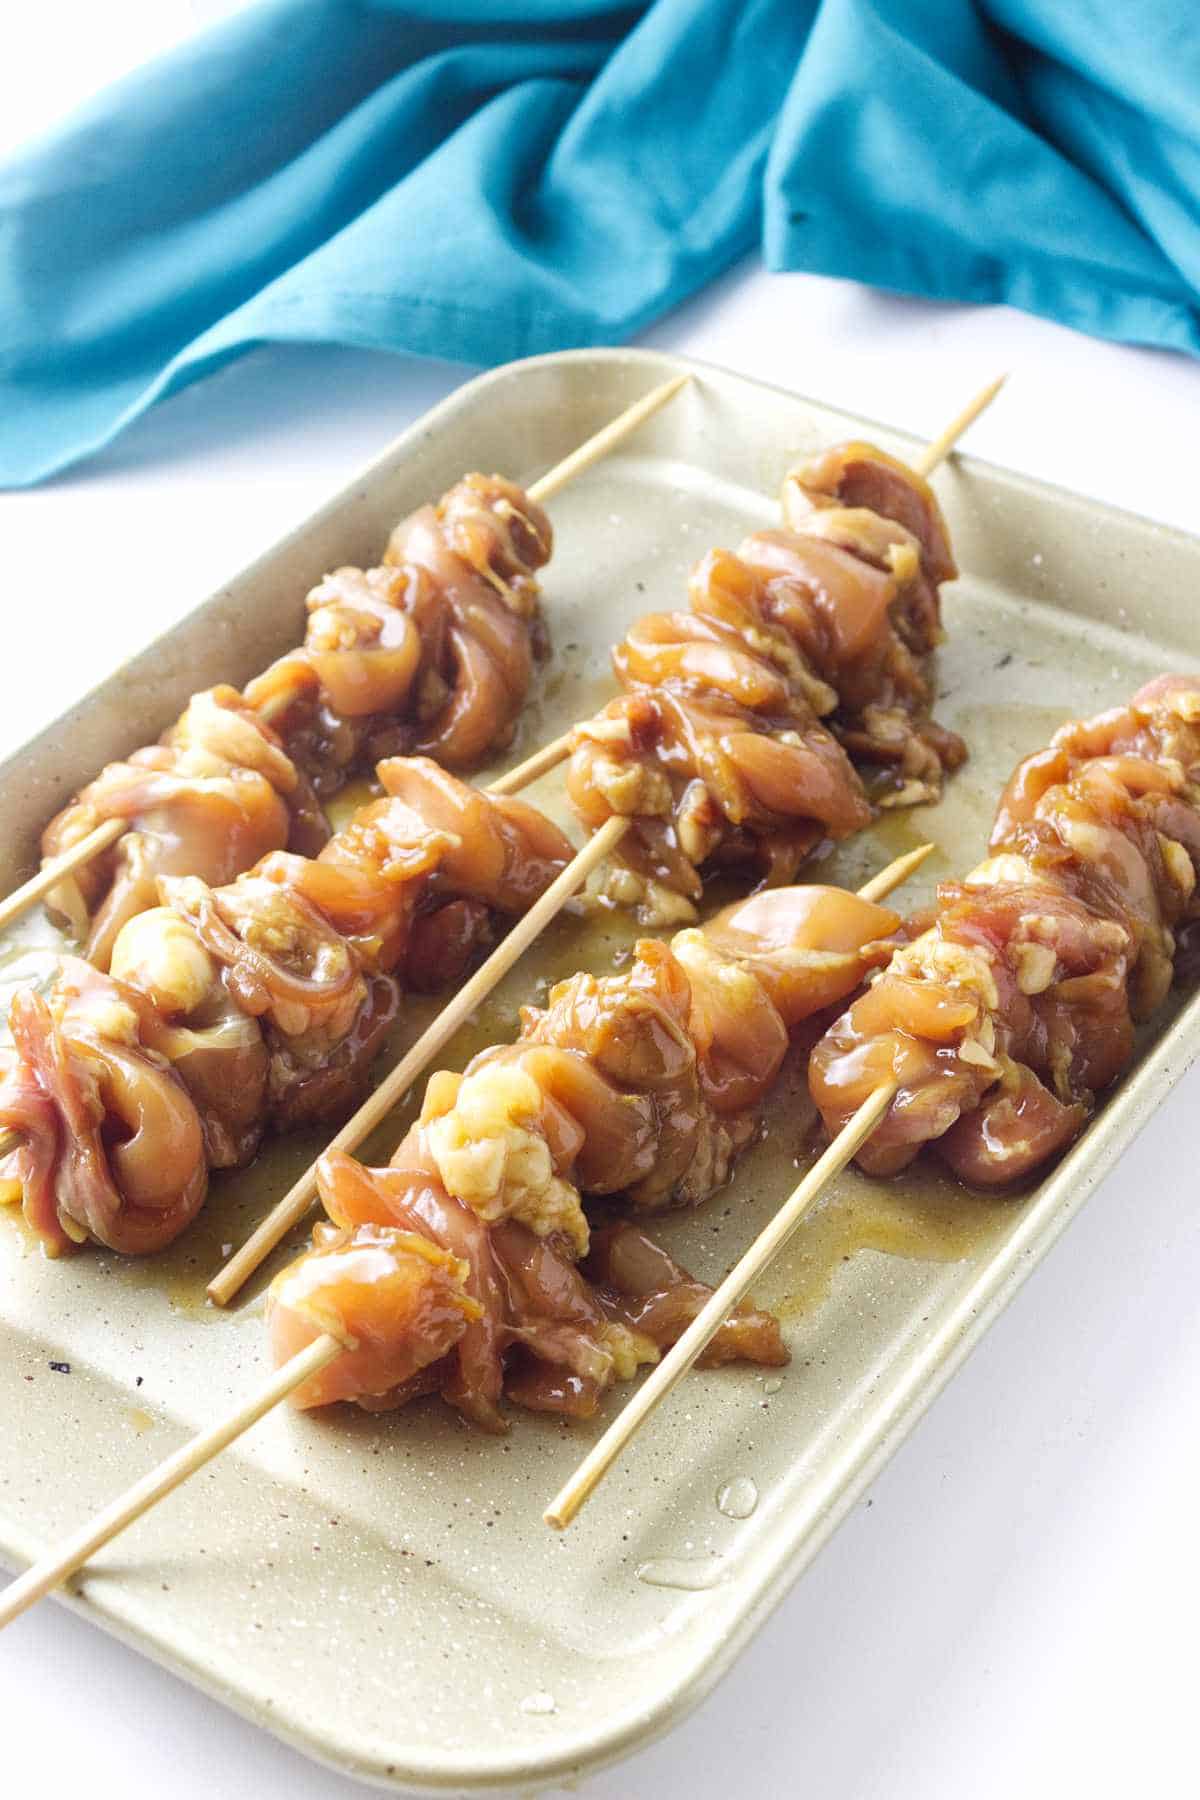 raw marinated chicken pieces on skewers ready for grilling or oven baking.